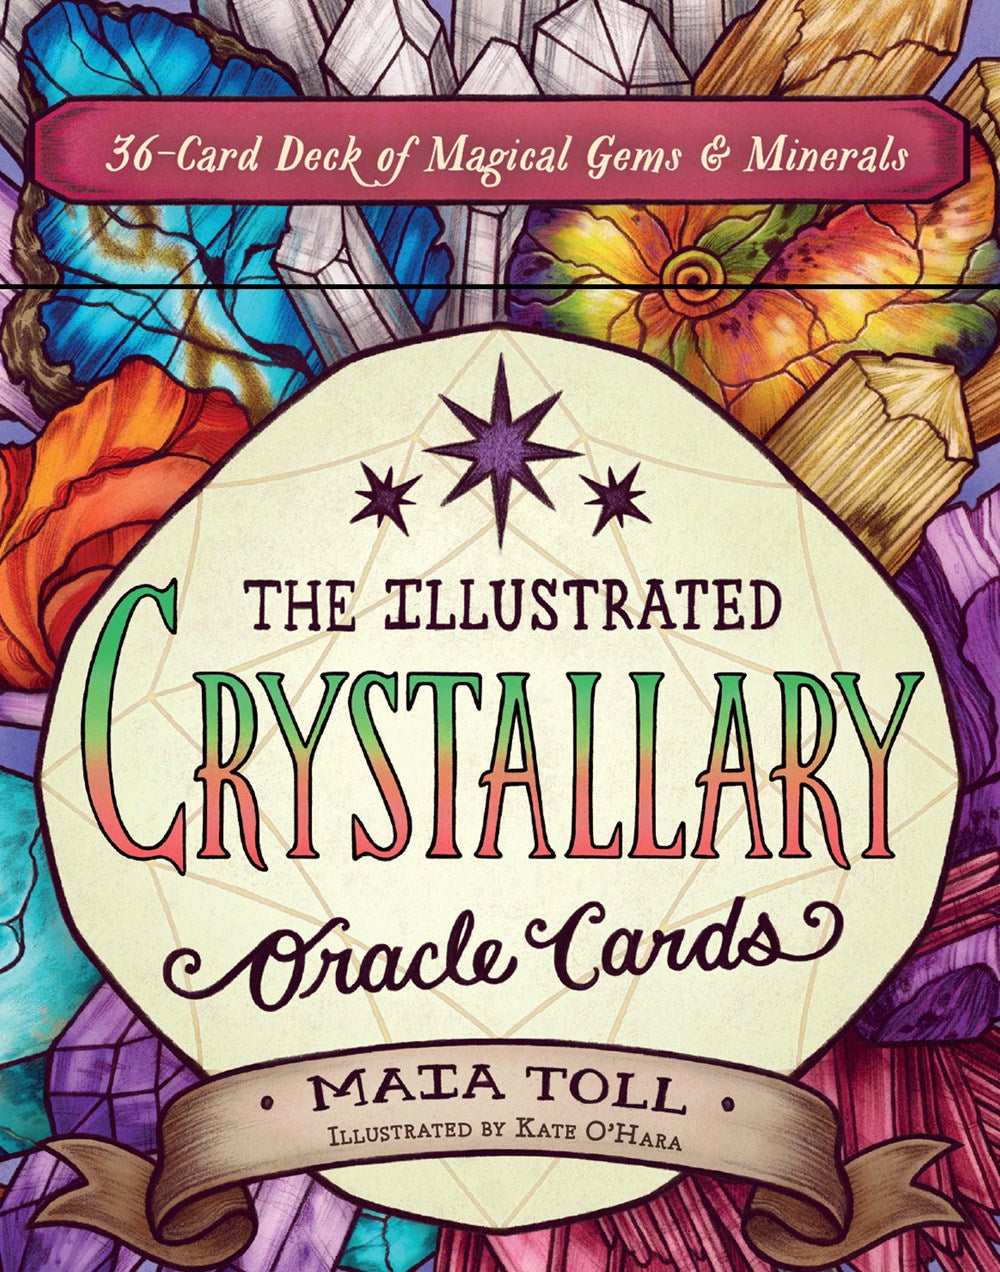 The Illustrated Crystallary Oracle